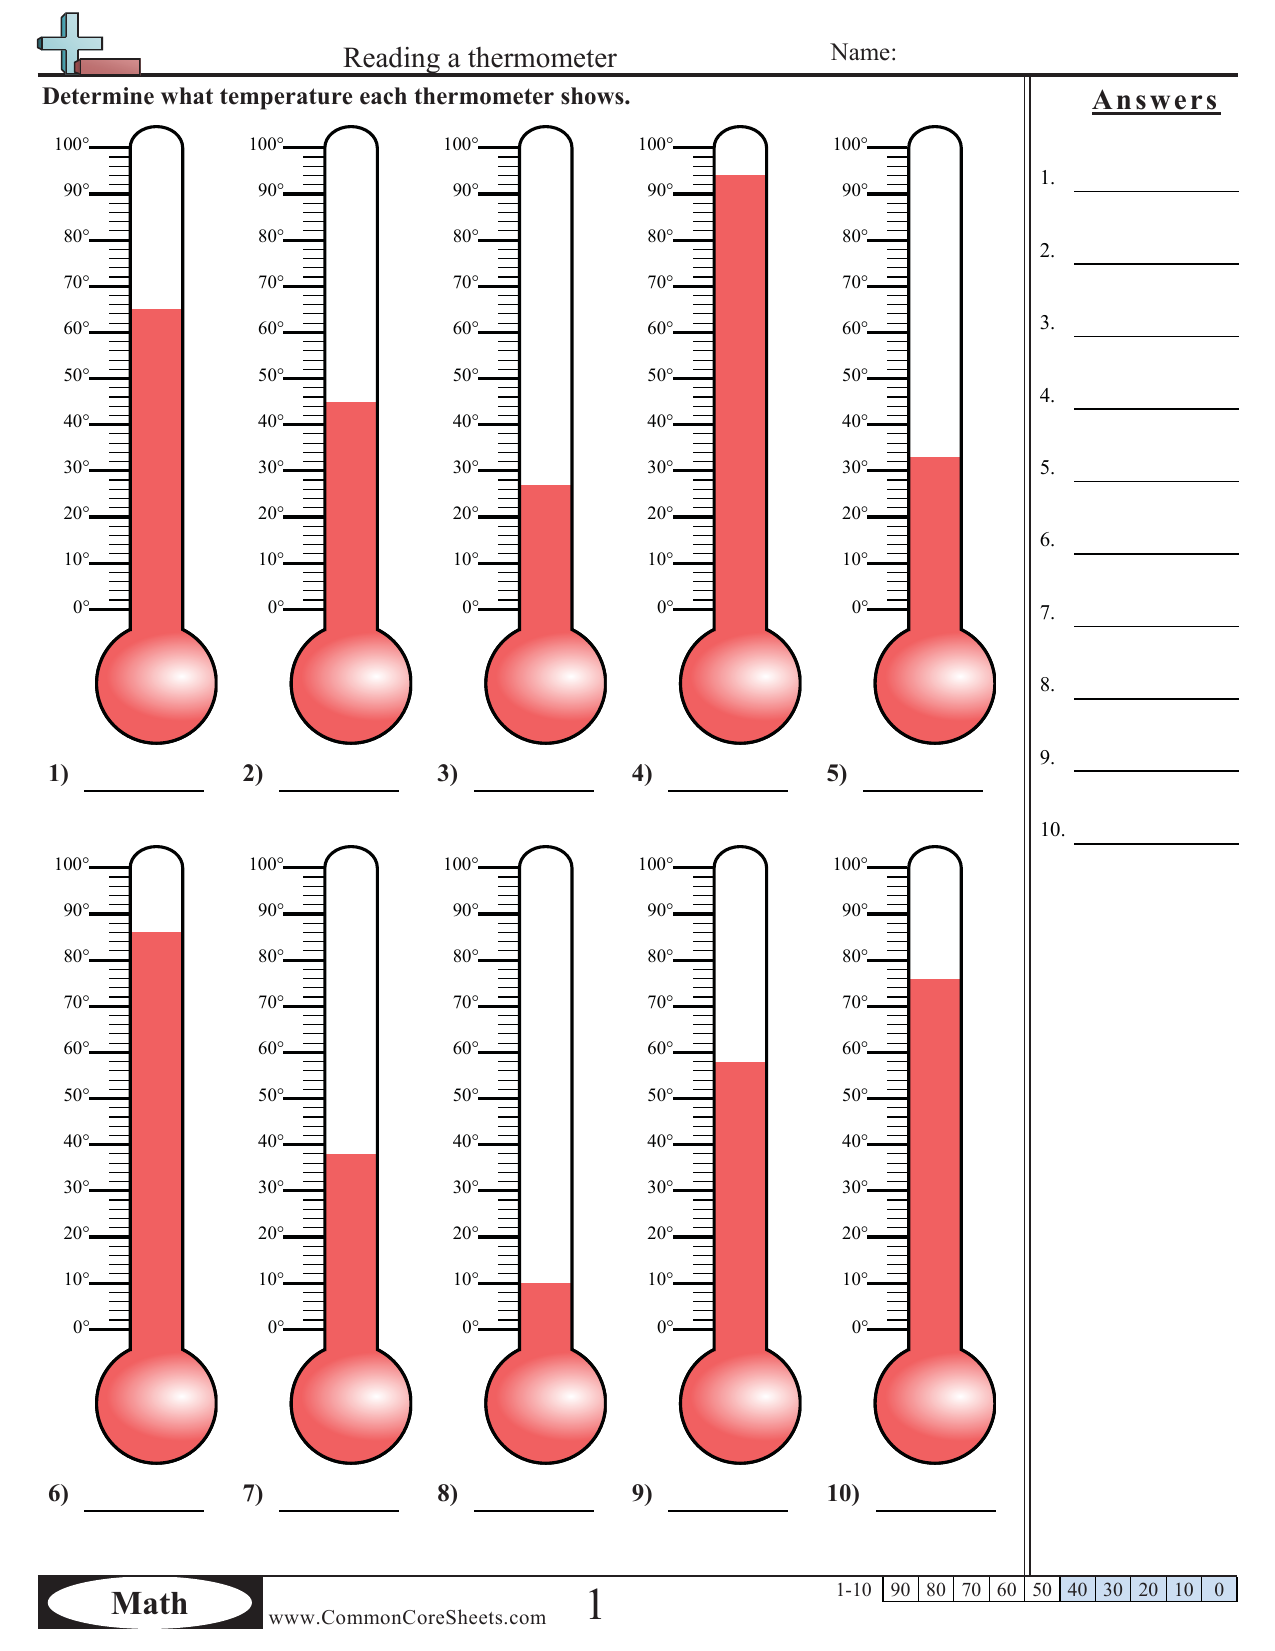 Reading A Thermometer Worksheet Answers